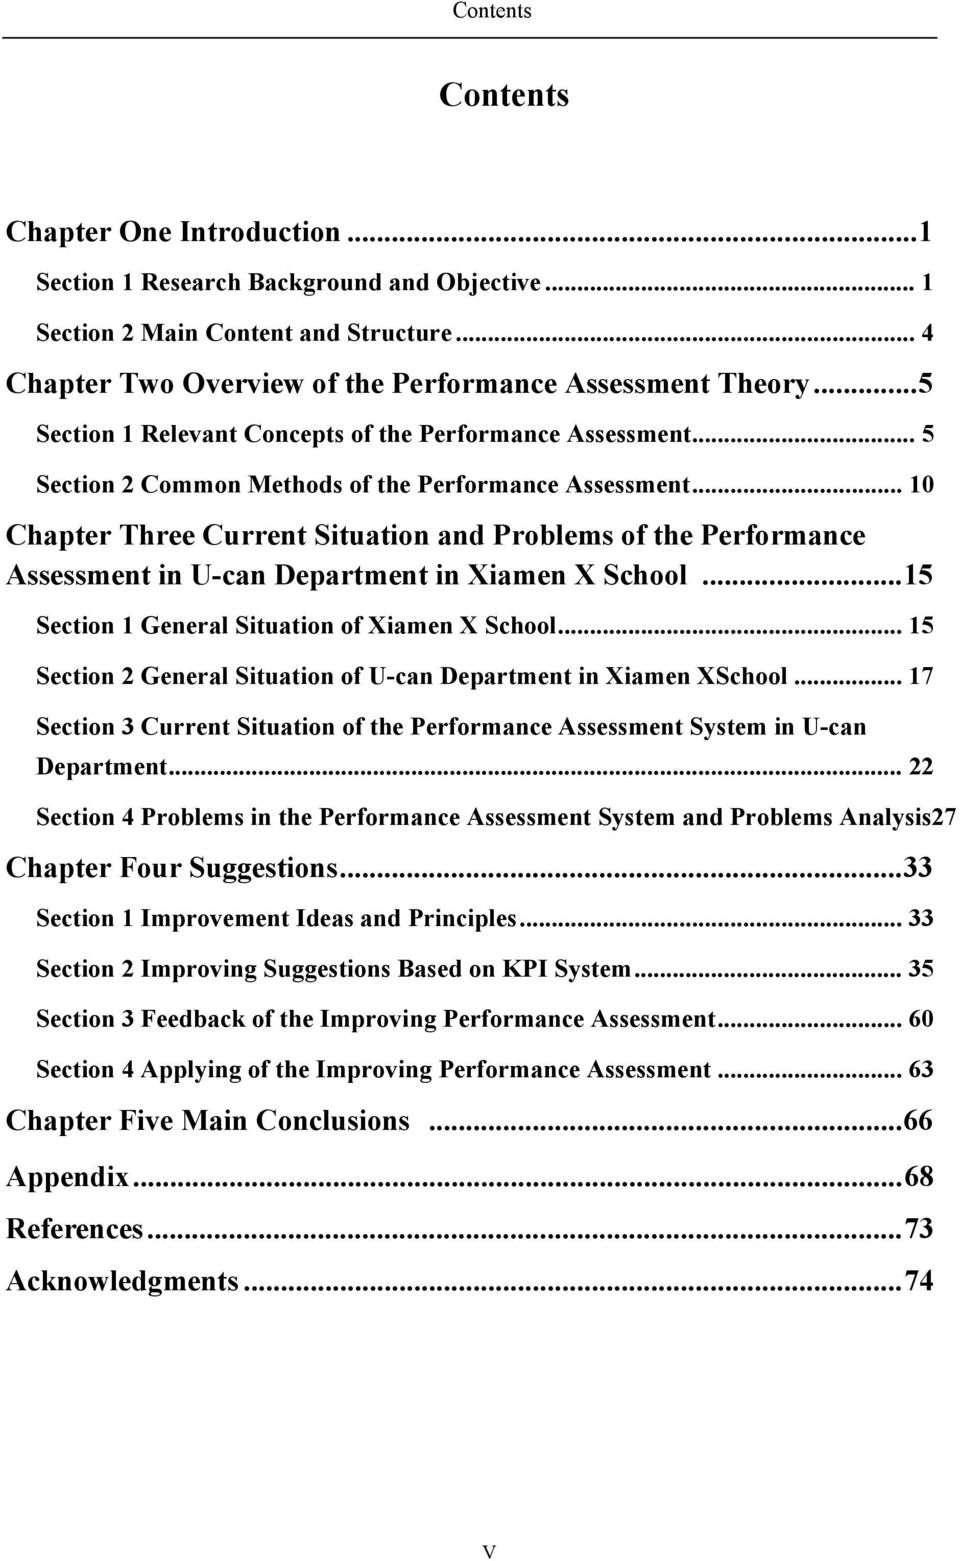 .. 10 Chapter Three Current Situation and Problems of the Performance Assessment in U-can Department in Xiamen X School... 15 Section 1 General Situation of Xiamen X School.